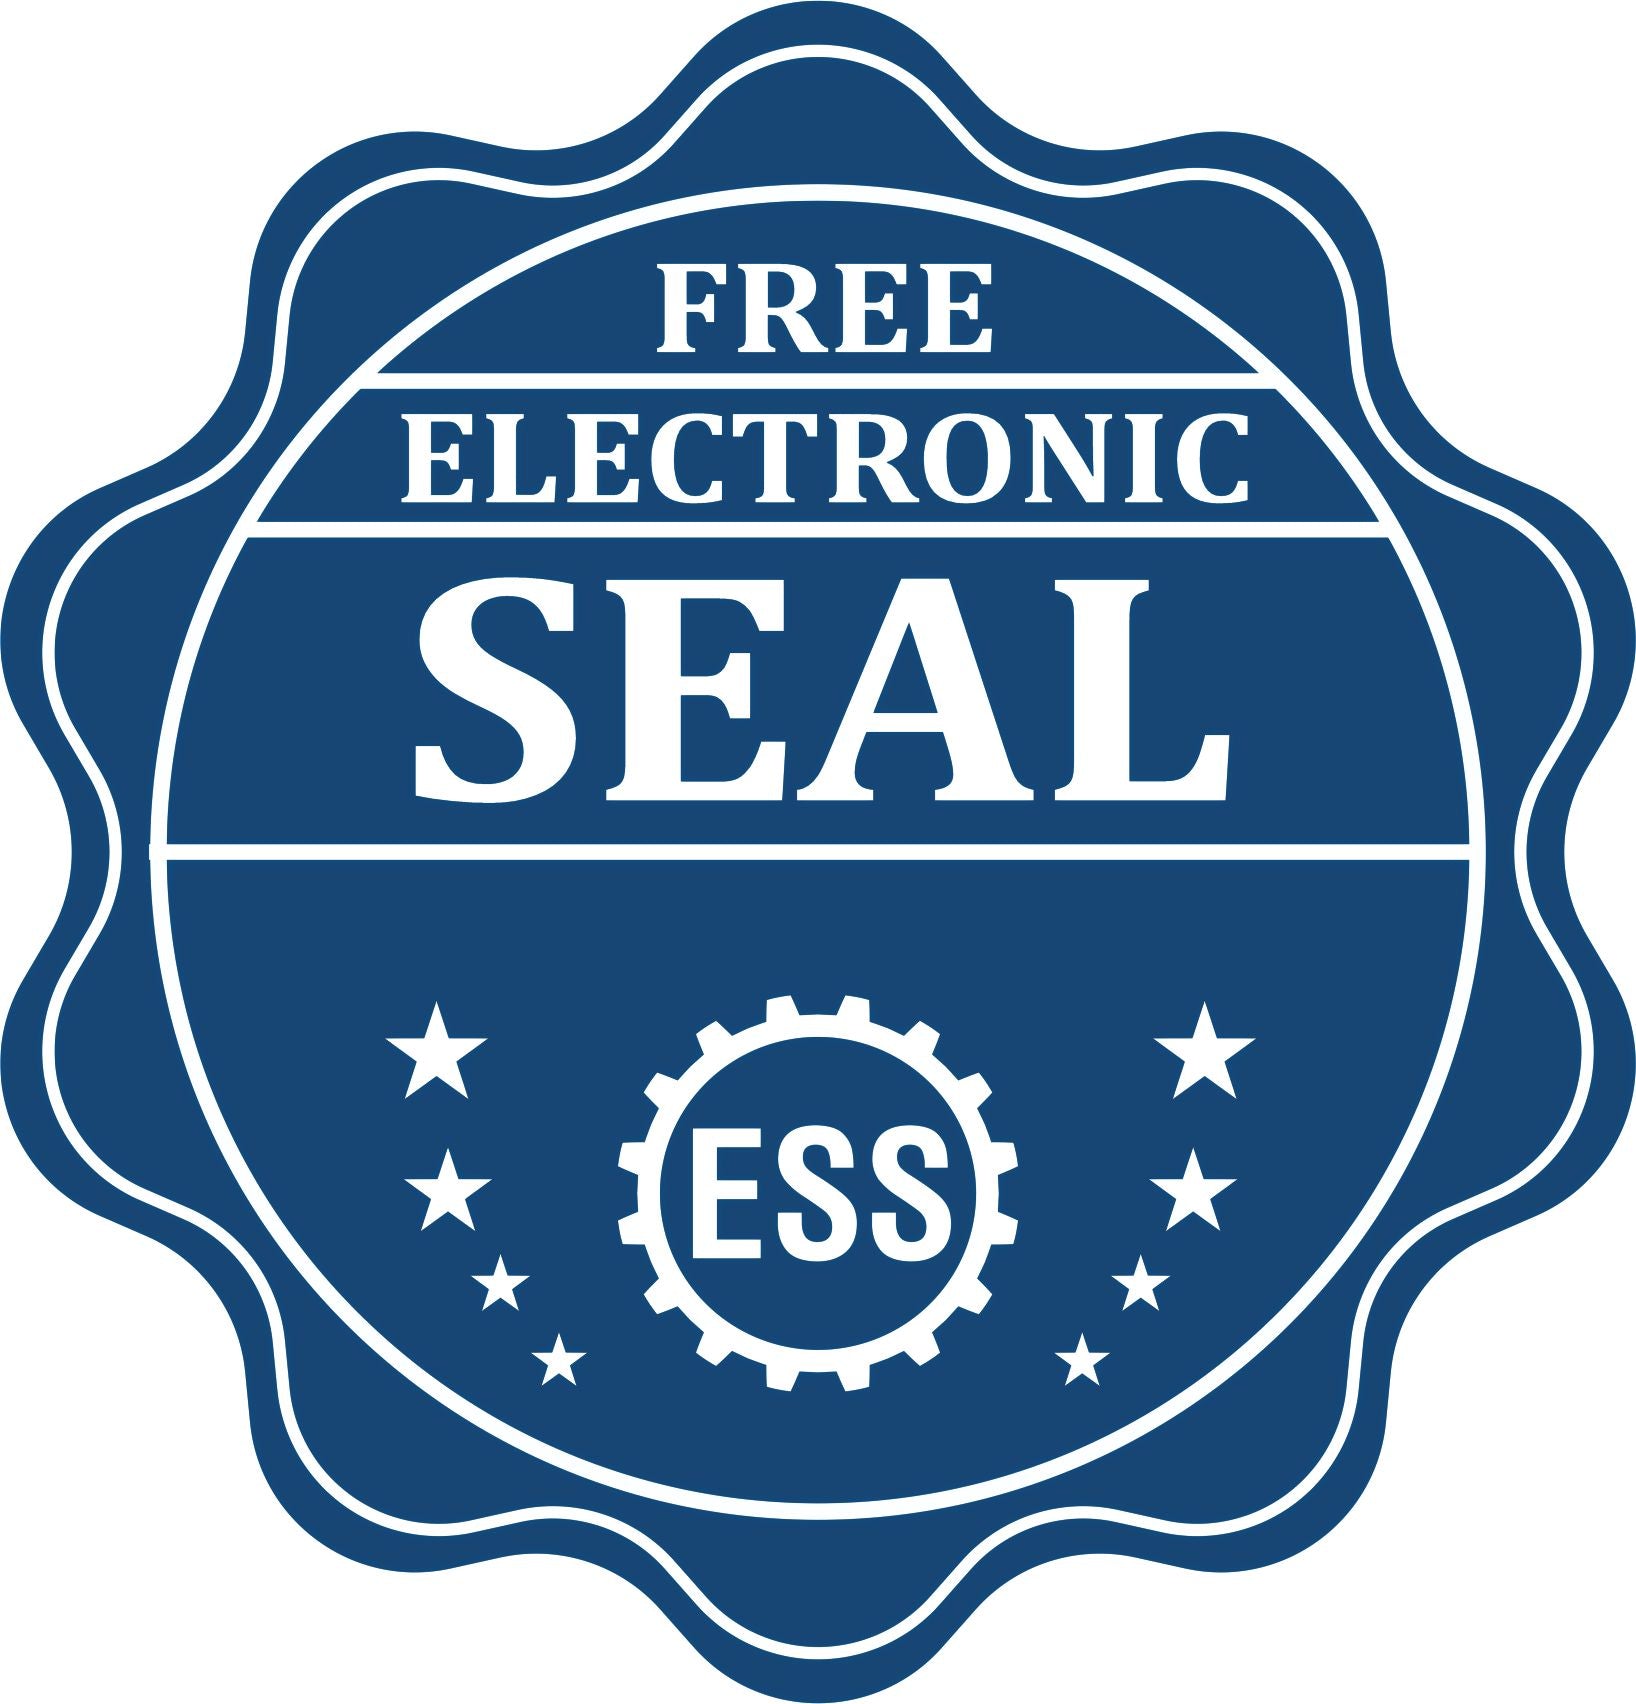 A badge showing a free electronic seal for the Super Slim Nevada Notary Public Stamp with stars and the ESS gear on the emblem.